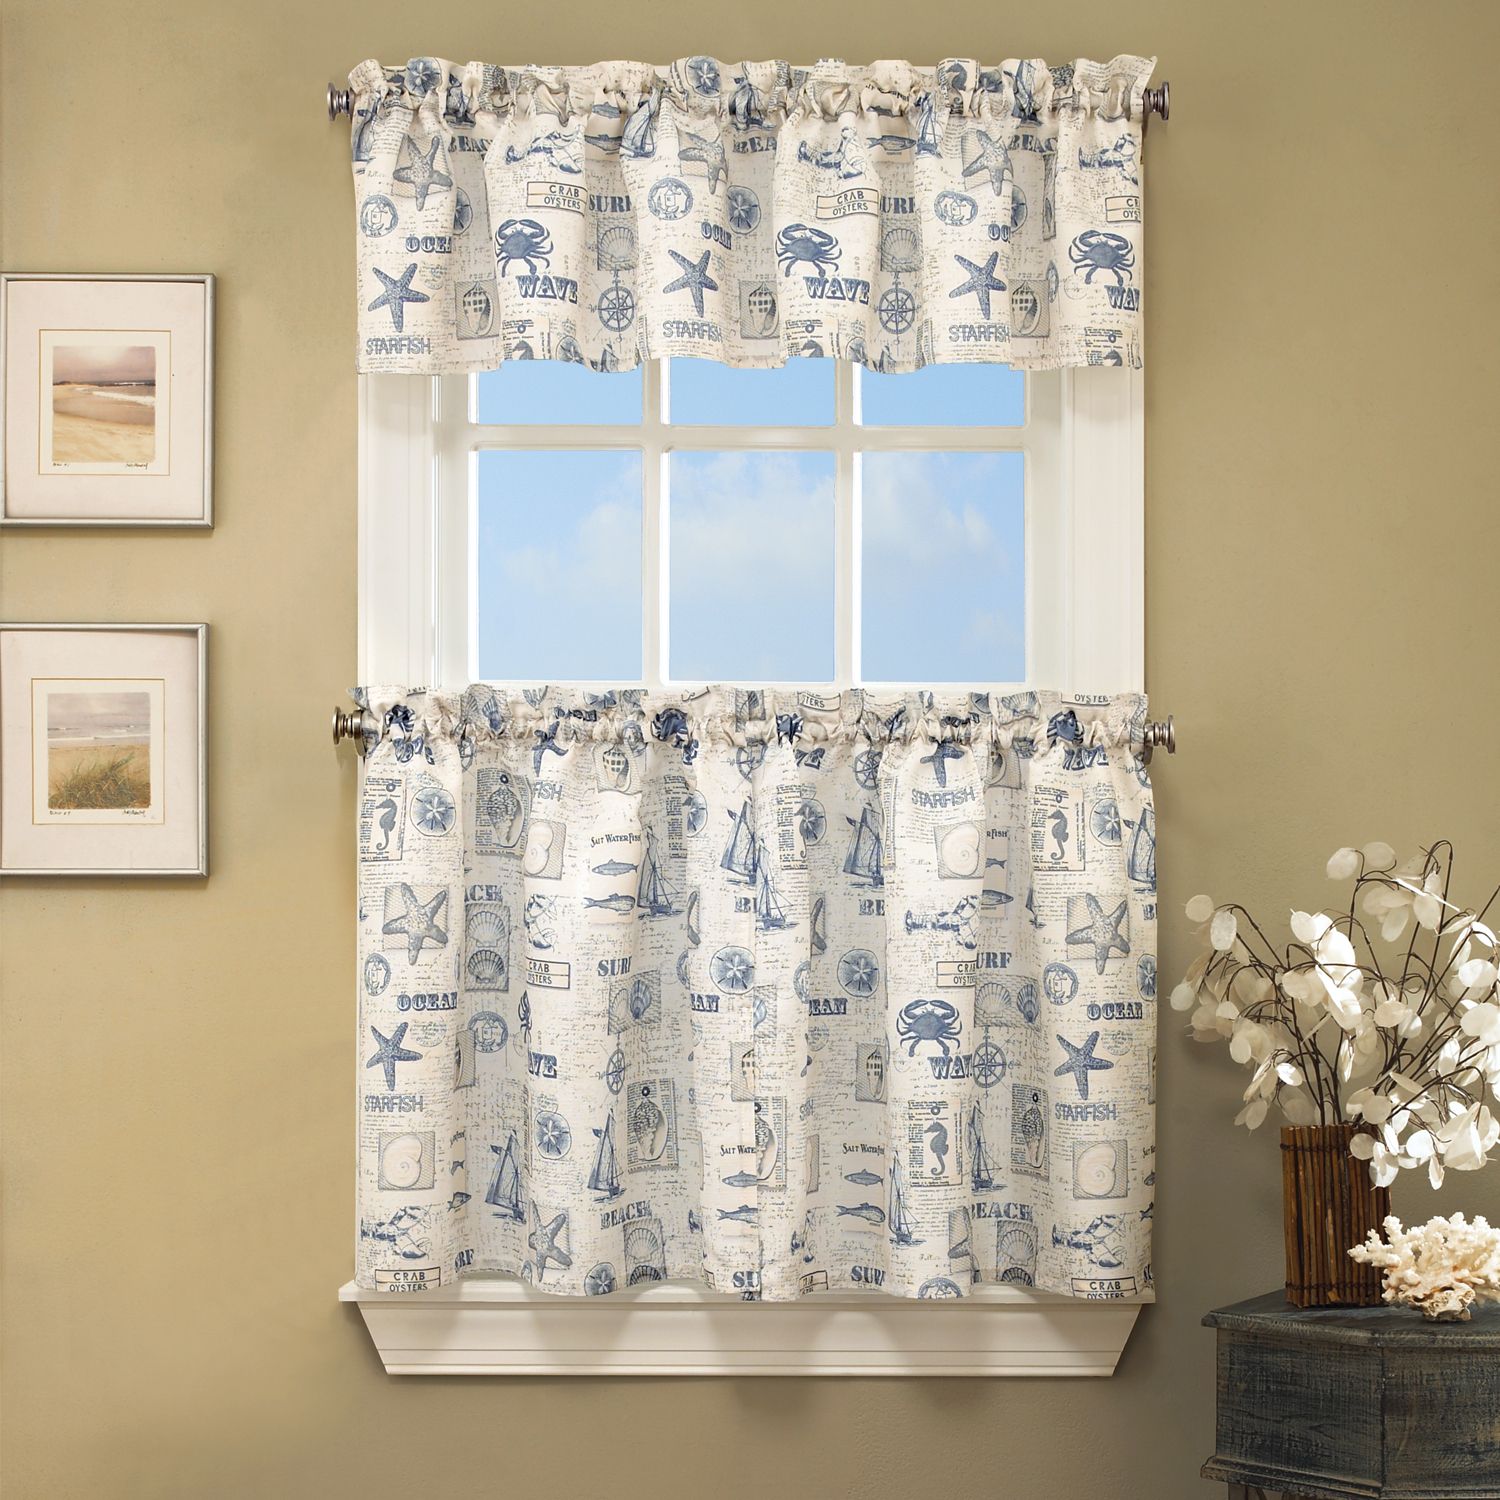 Details Aboutthe Sea Printed Ocean Beach Images Kitchen Curtains Tiers  Or Valance Pertaining To Tranquility Curtain Tier Pairs (View 5 of 20)